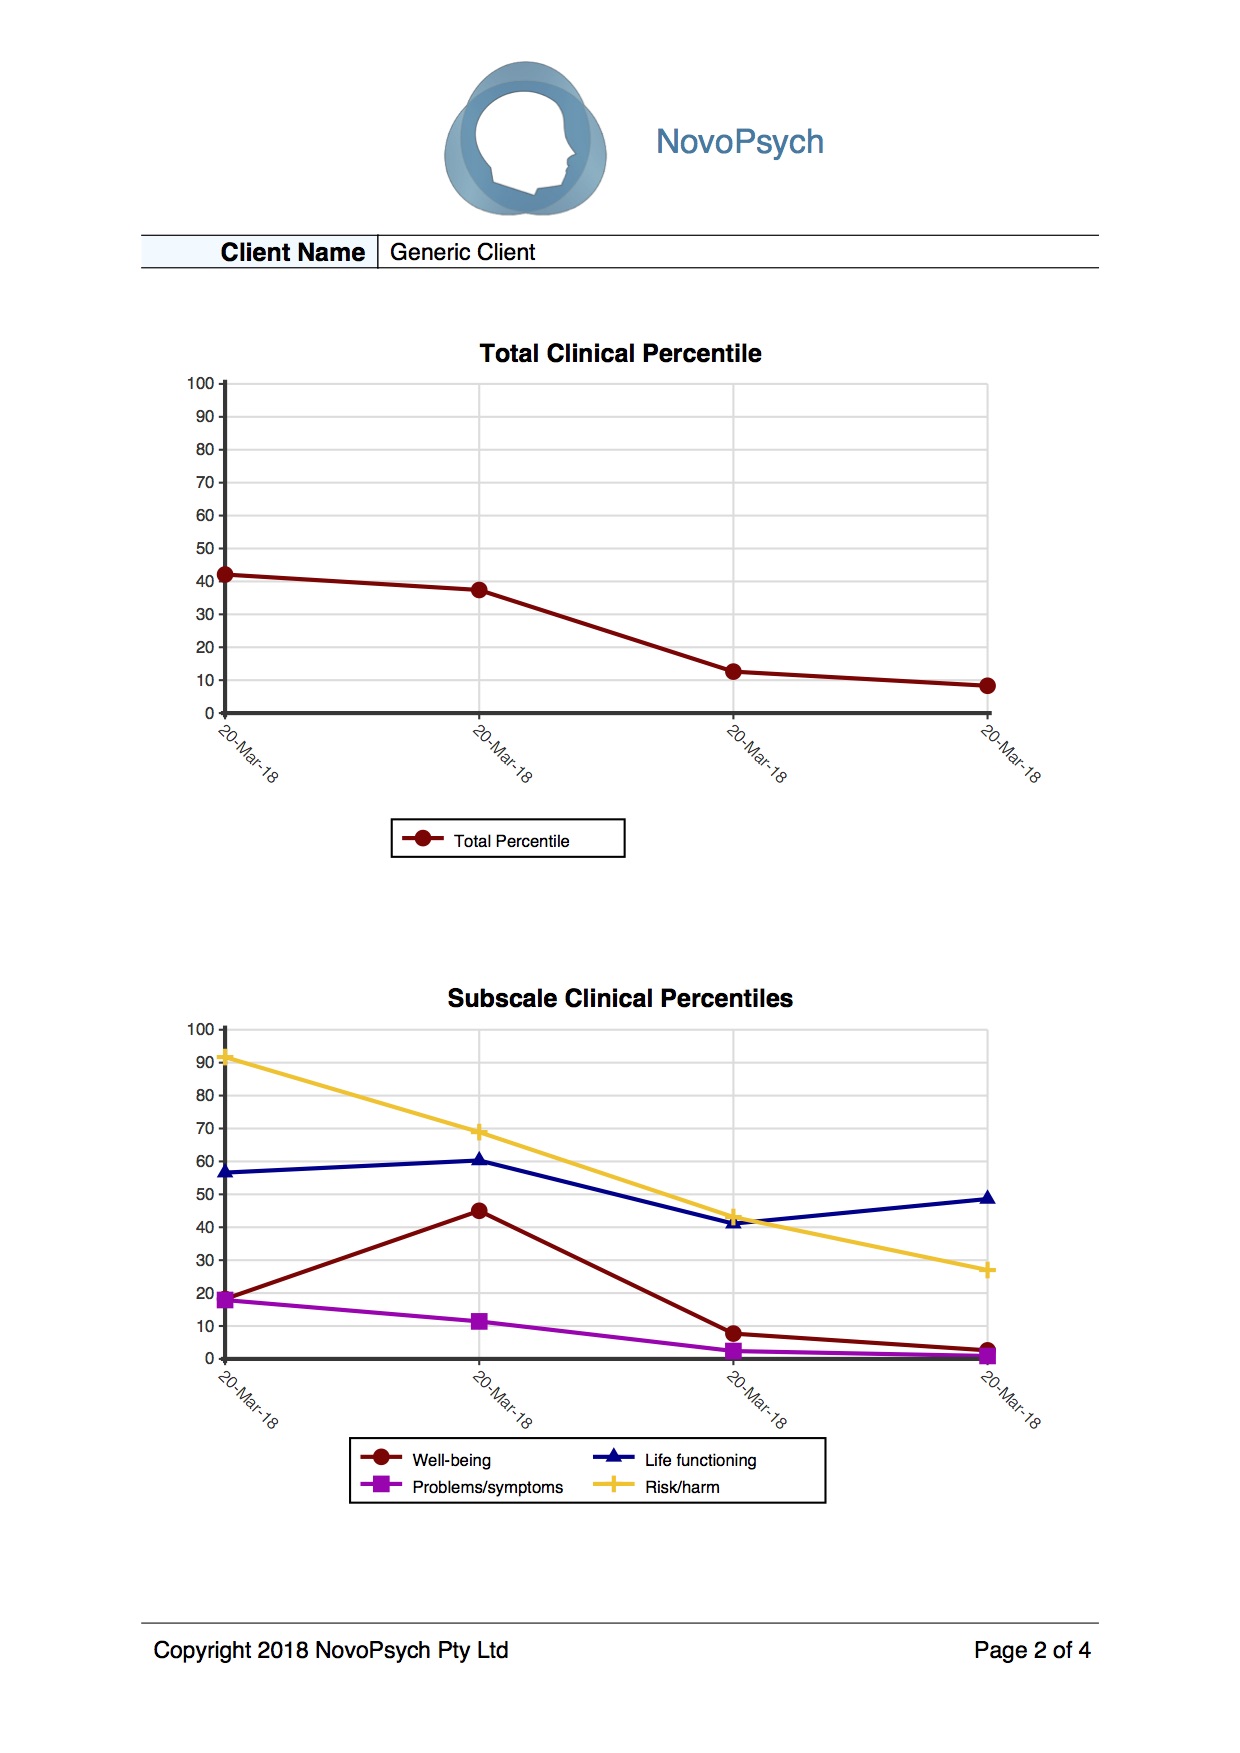 YP-CORE information : Clinical Outcomes in Routine Evaluation (and CST)